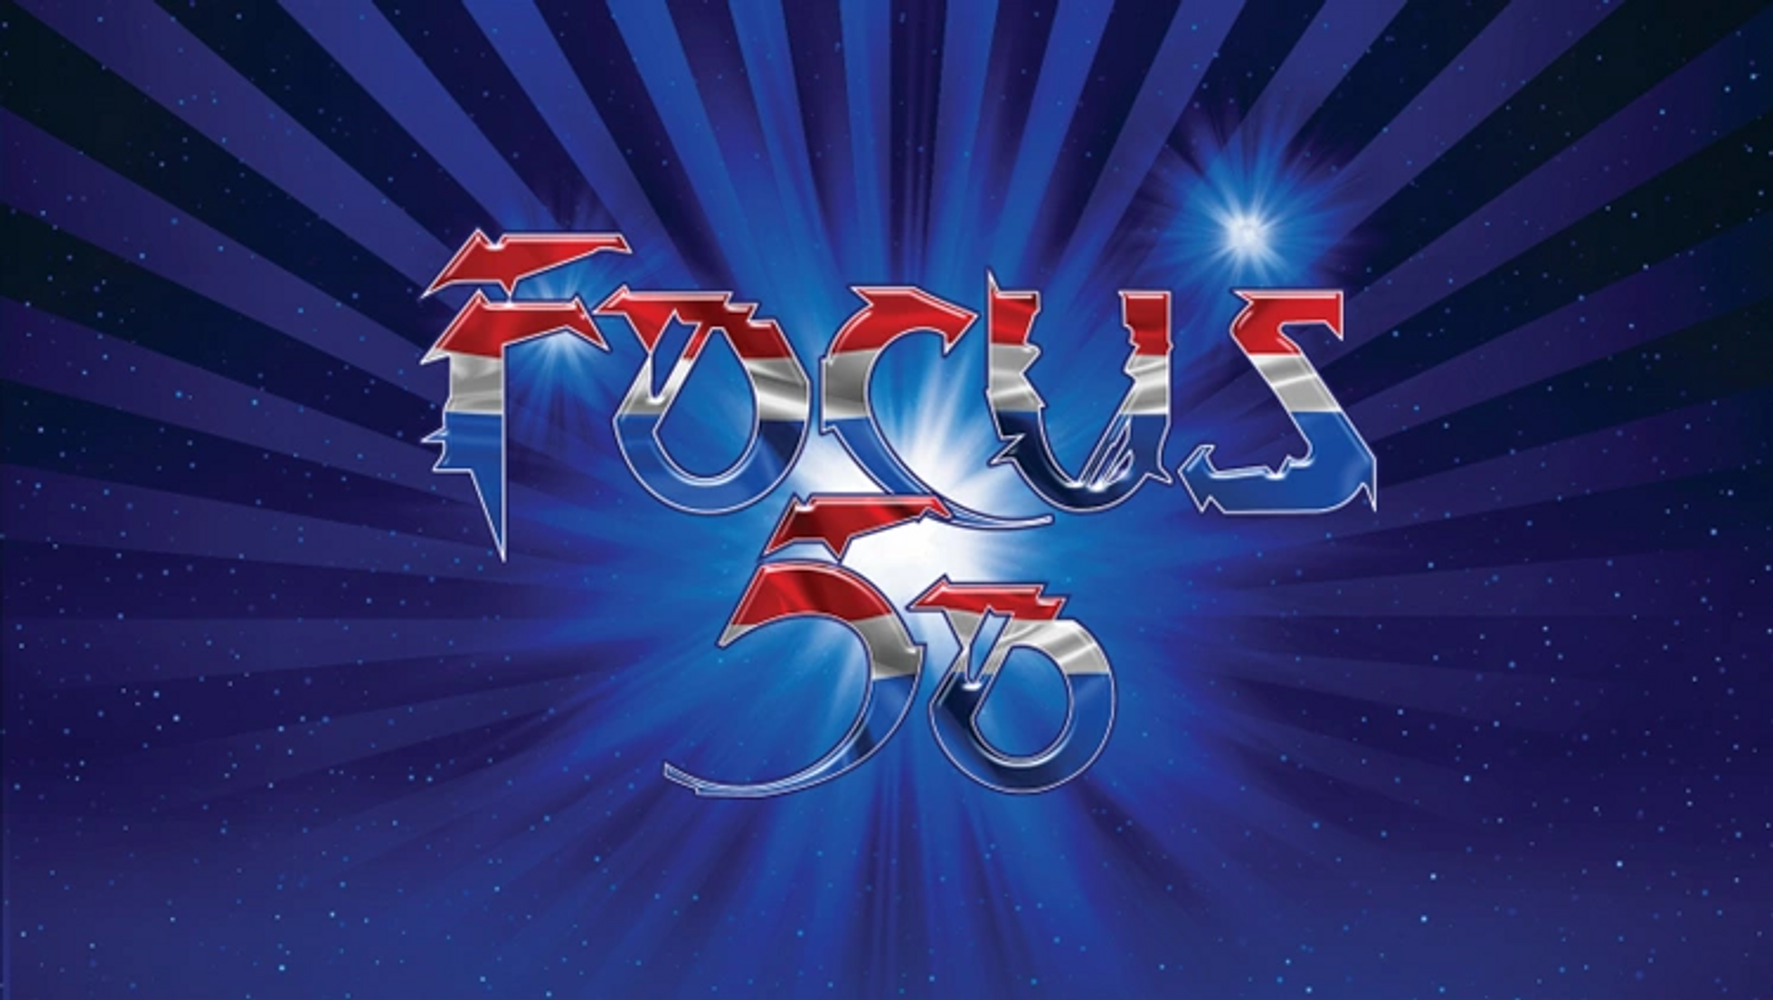 Focus The Band - Prog Rock, Band, Music and Bands